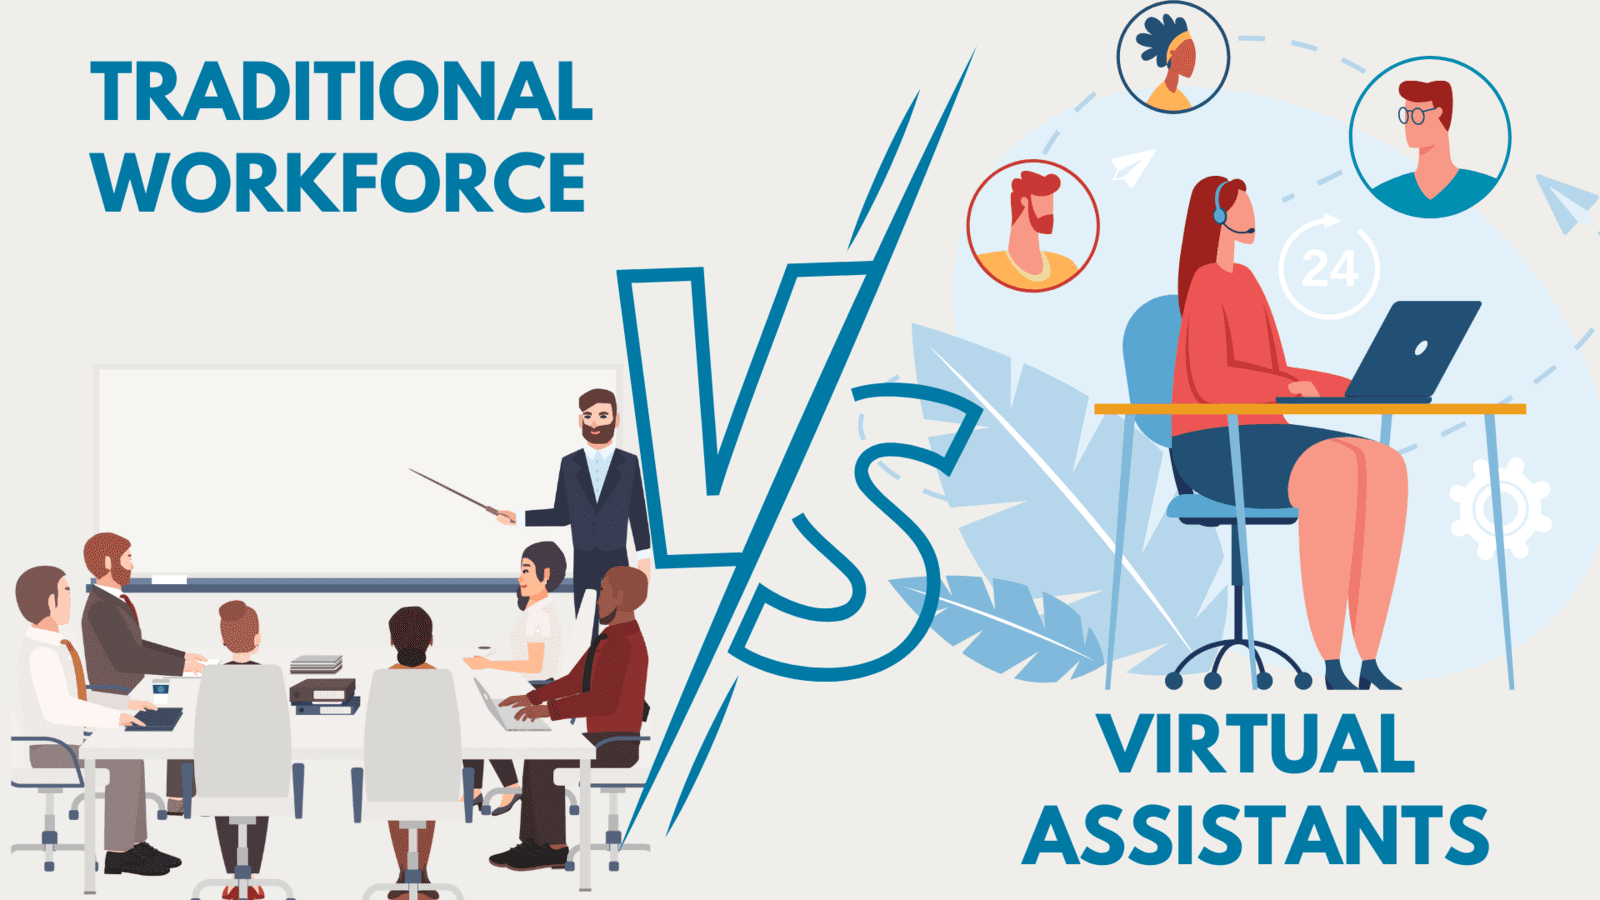 Cost of a Virtual Assistants vs. Traditional Workforce